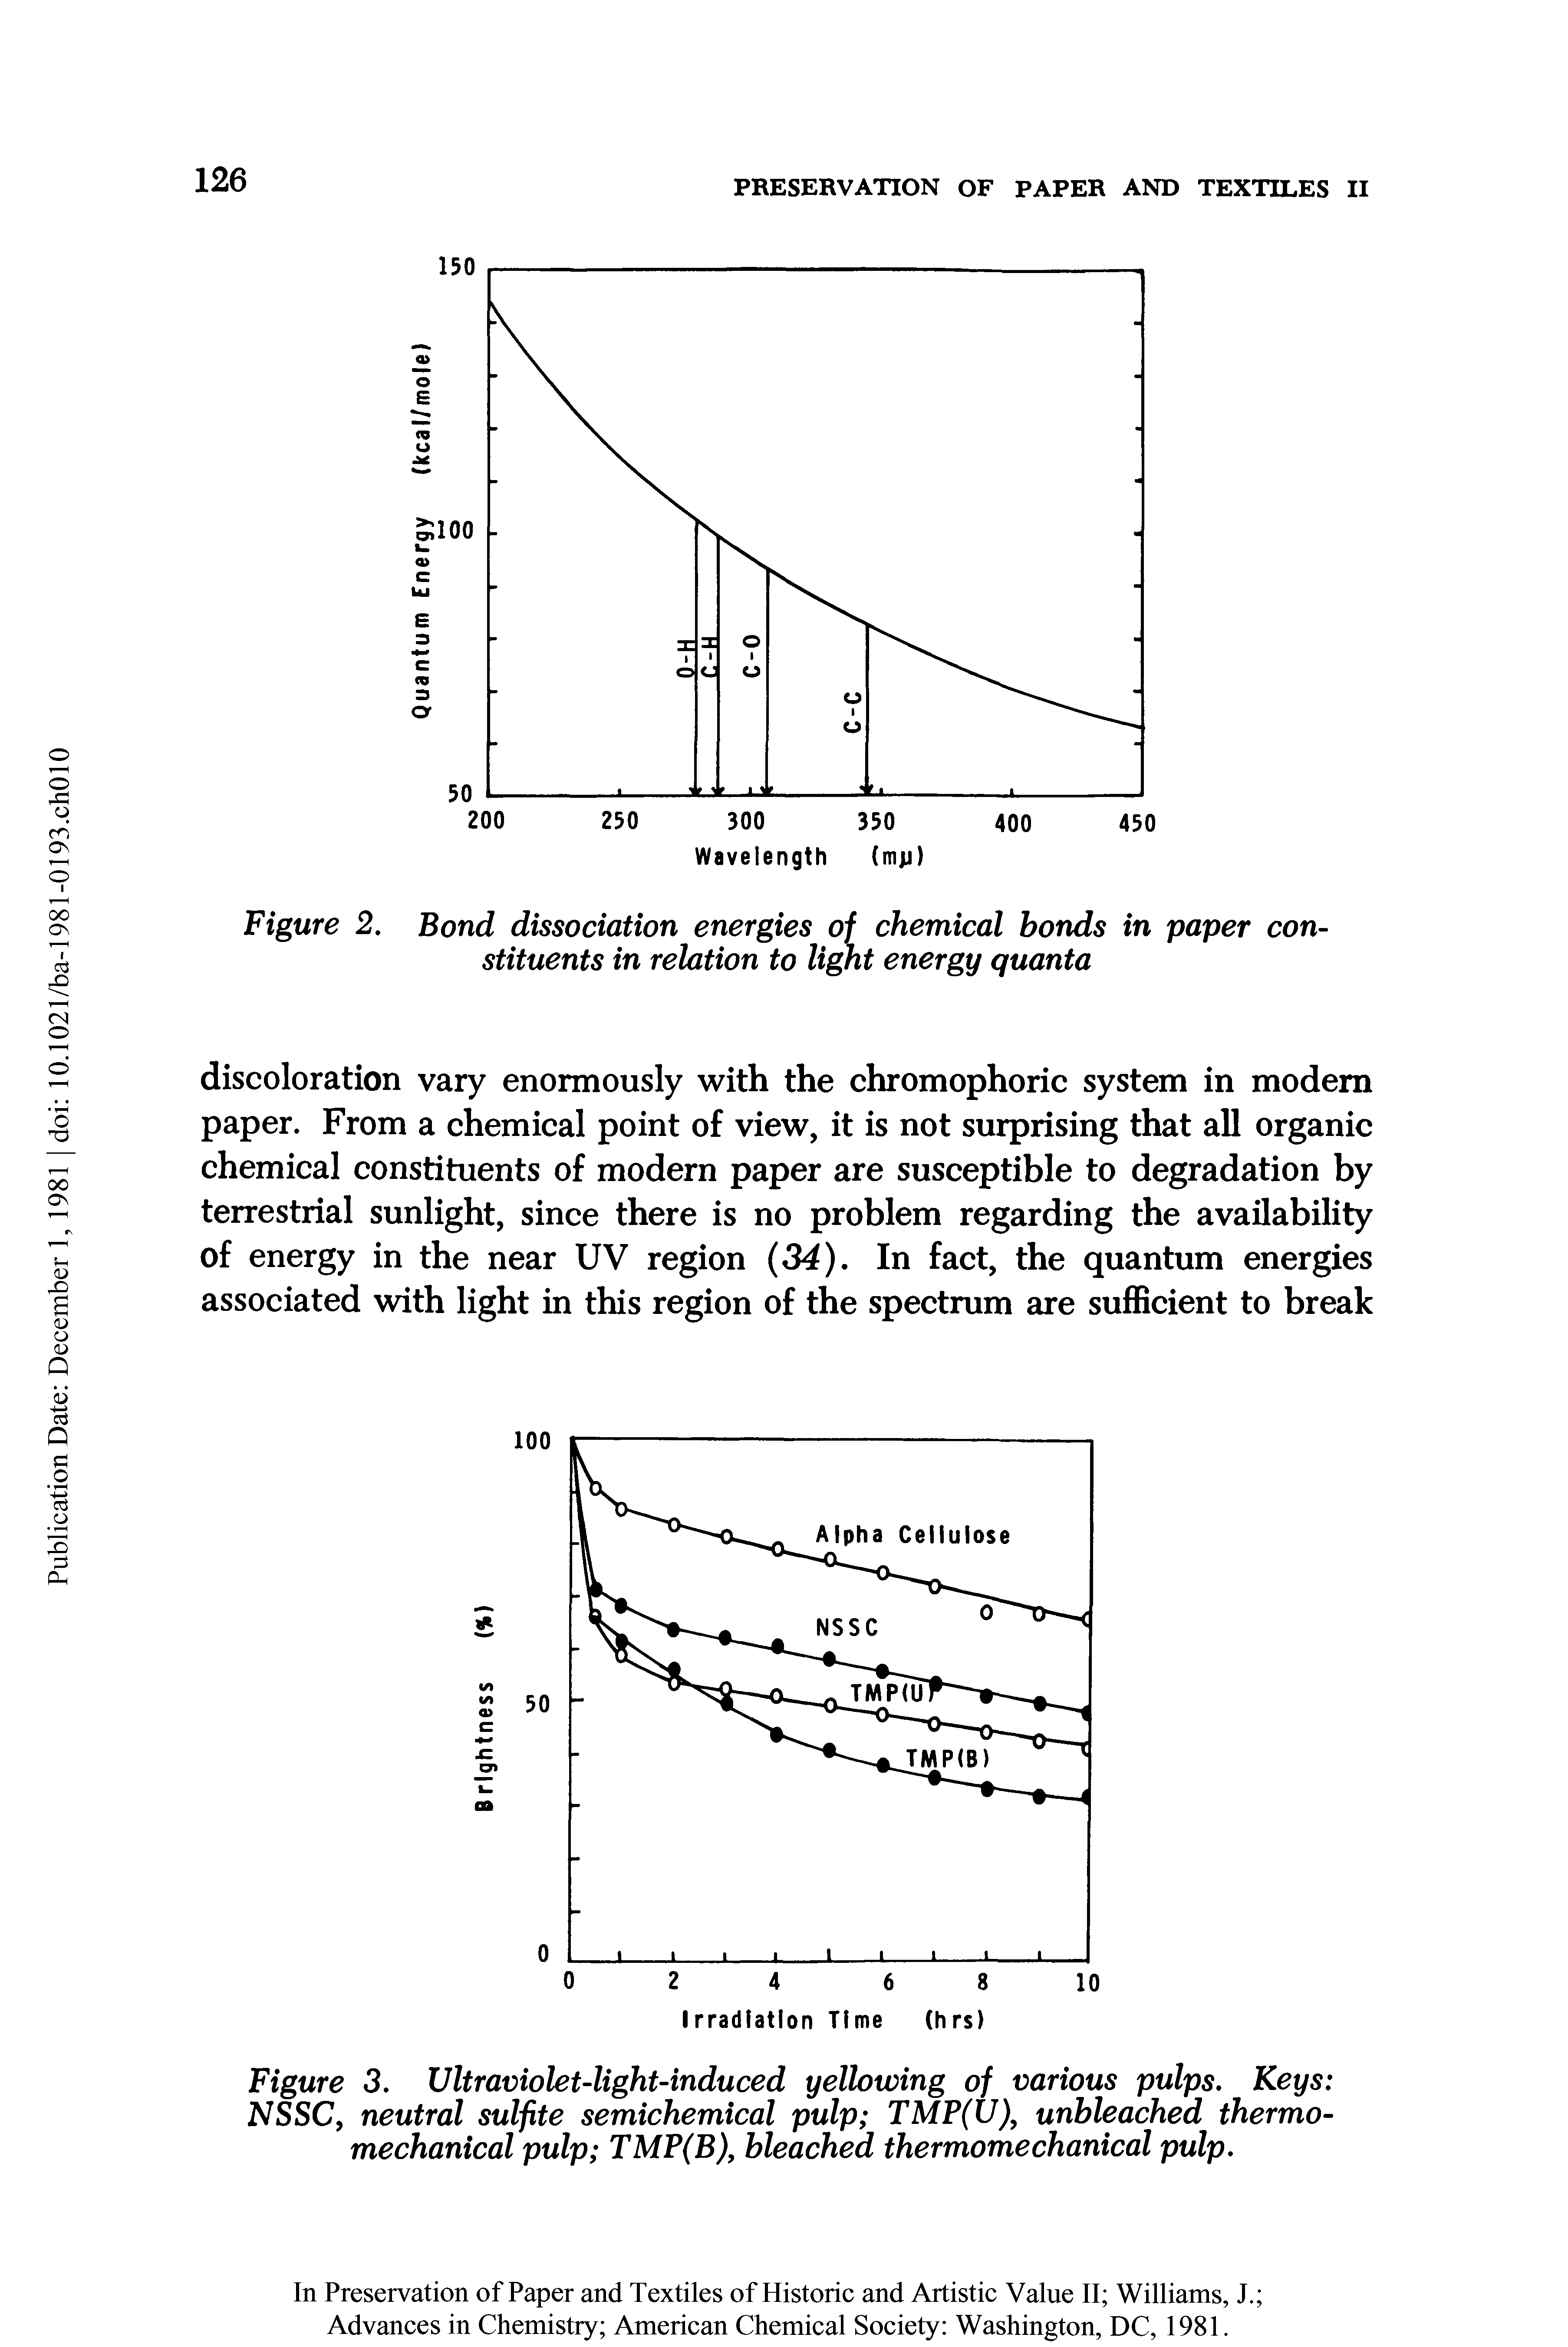 Figure 3. Ultraviolet-light-induced yellowing of various pulps. Keys NSSC, neutral sulfite semichemical pulp TMP(U), unbleached thermomechanical pulp TMP(B), bleached thermomechanical pulp.